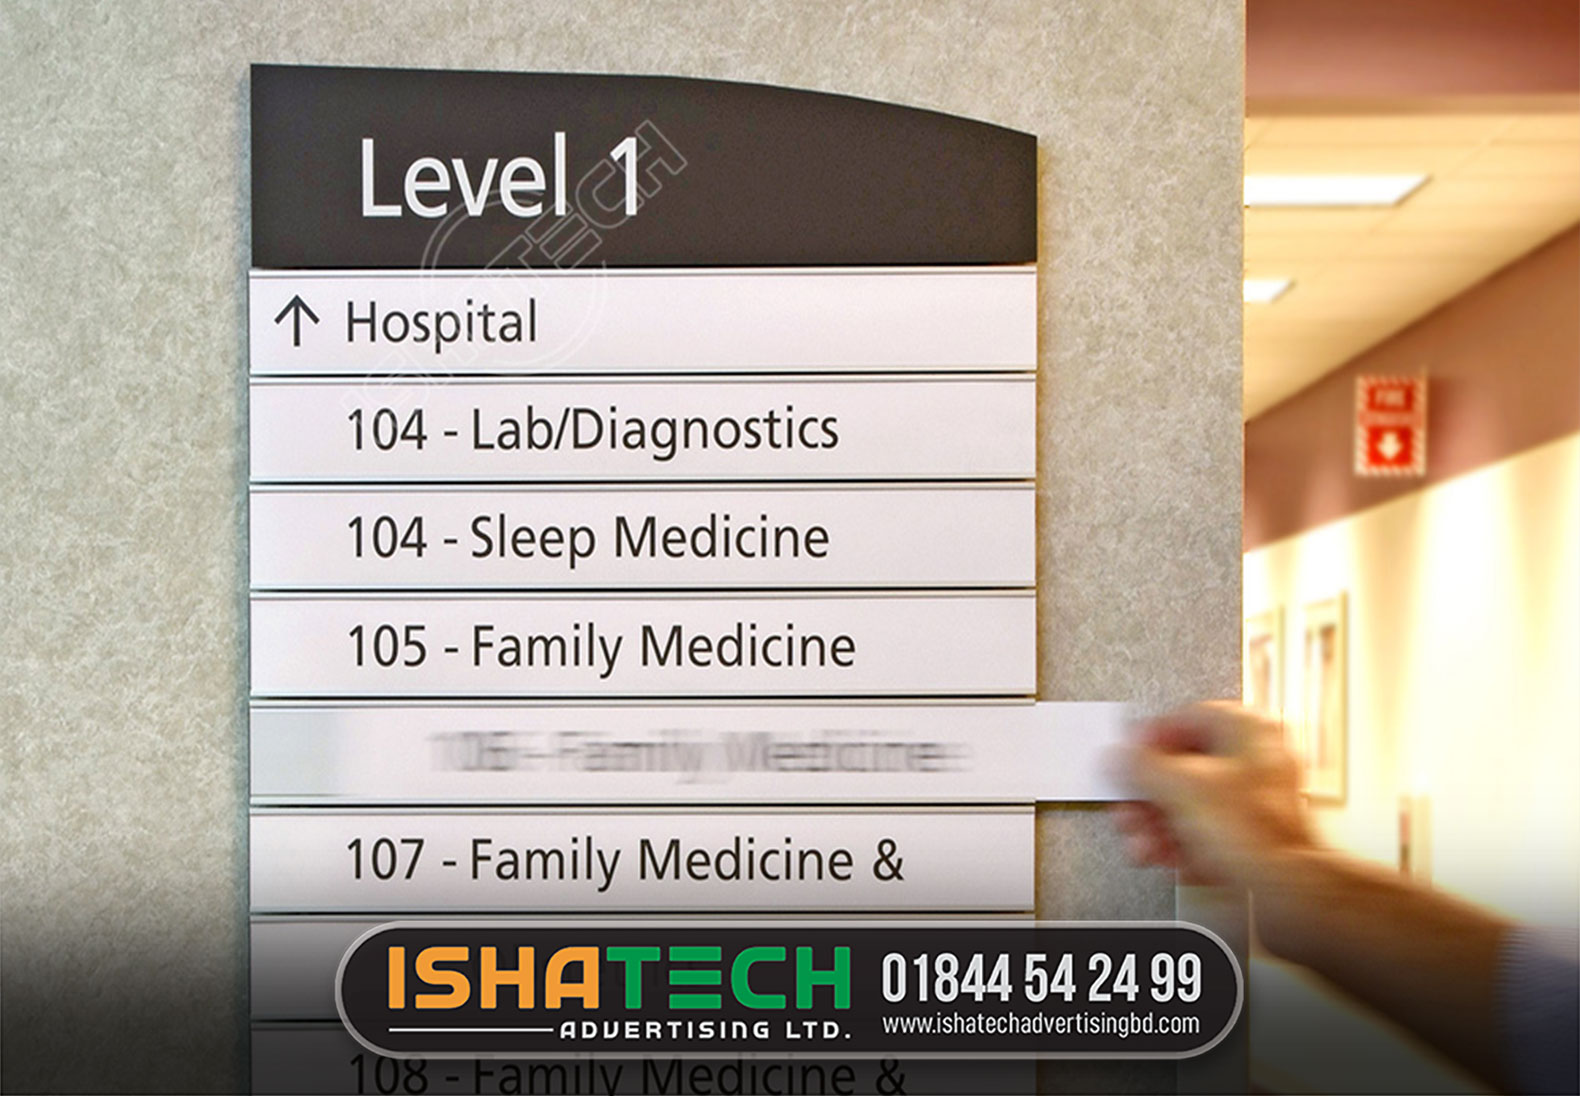 HOSPITAL LABEL DIRECTIONAL SIGNBOARD MAKING BD BY ISHATECH ADVERTISING LTD